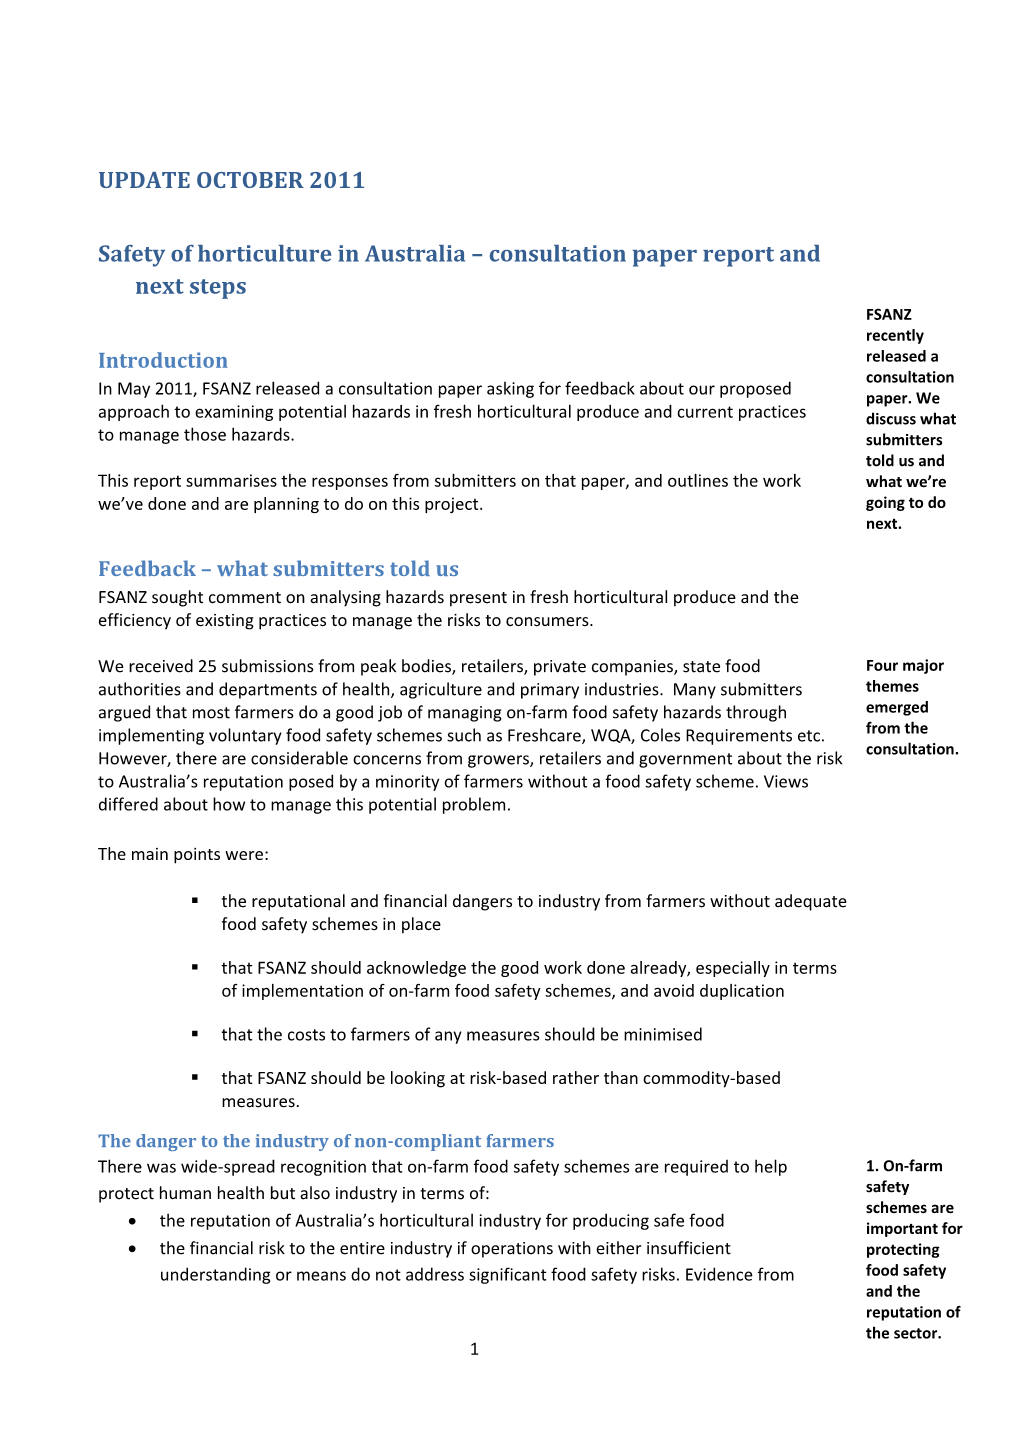 Safety of Horticulture in Australia Consultation Paper Report and Next Steps